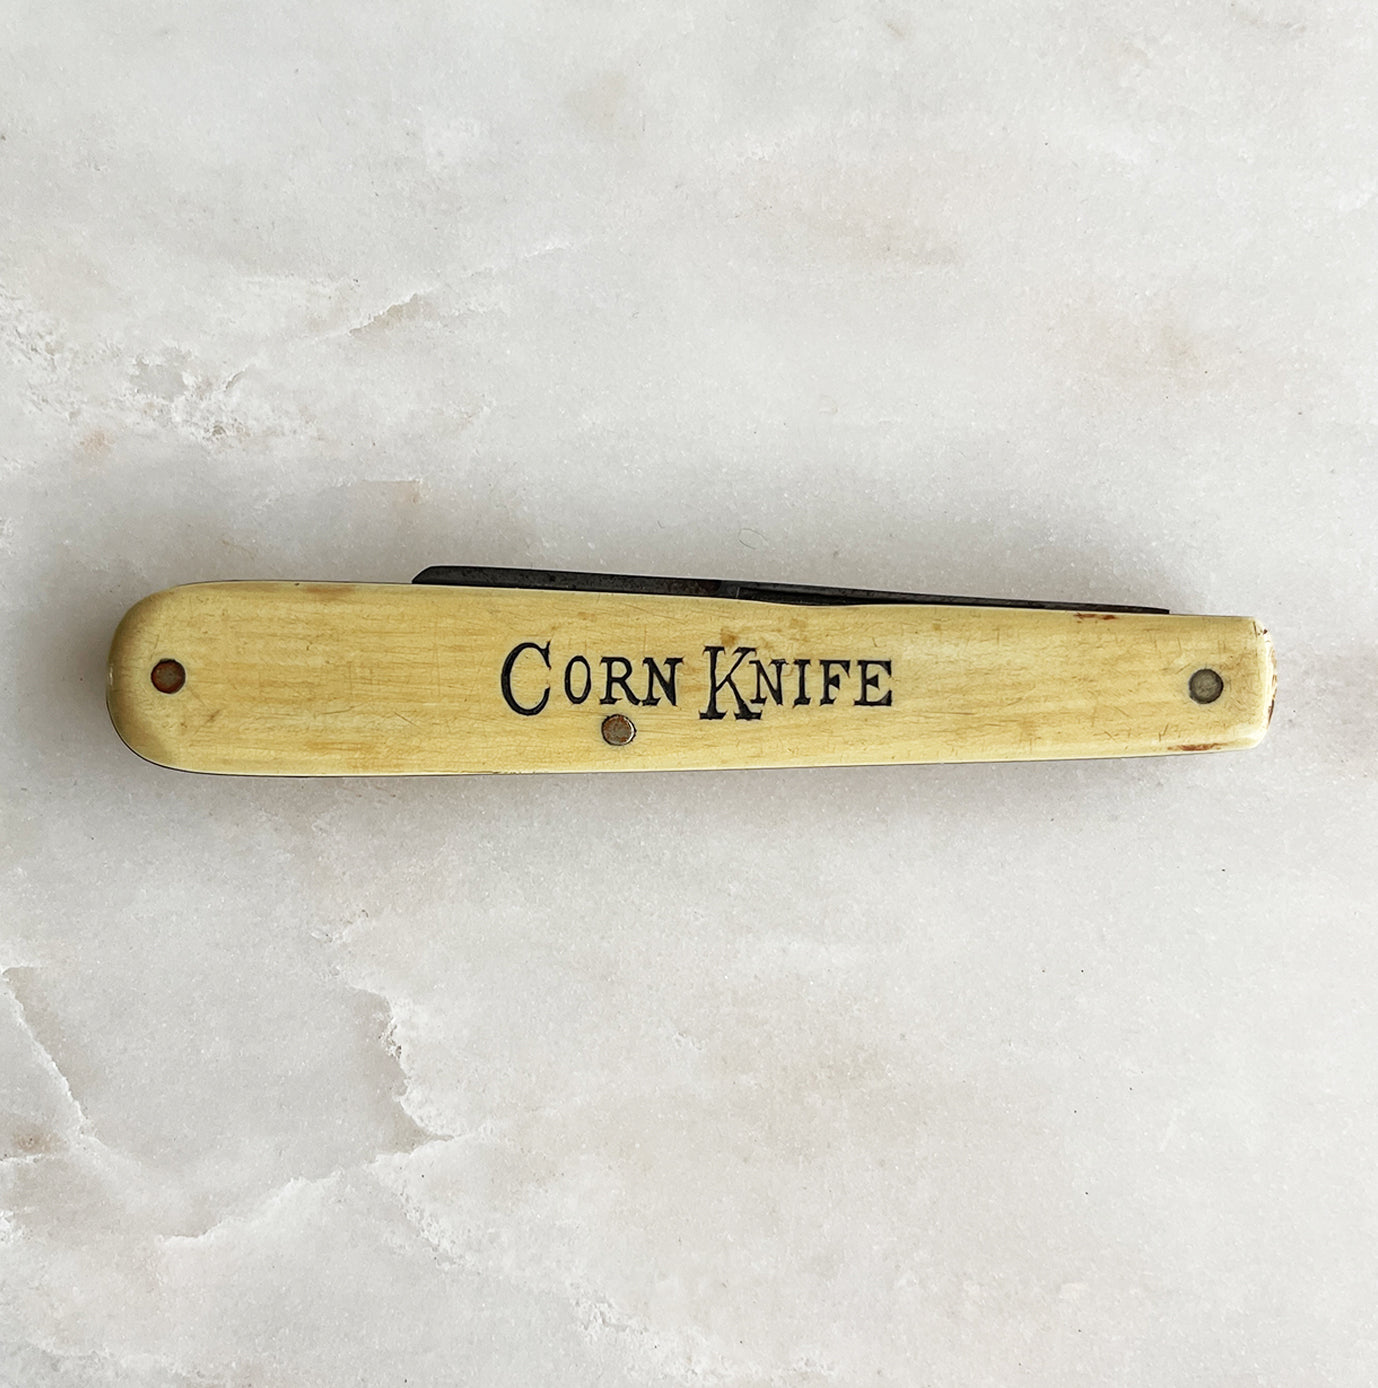 An Antique Waterfall celluloid handle scales, the front is etched CORN KNIFE. High carbon steel spey style blade with long nail pull and finger groove. Brass liners and handle pins. High quality antique pocket knife. Superb condition with a nice patina - SHOP NOW - www.intovintage.co.uk